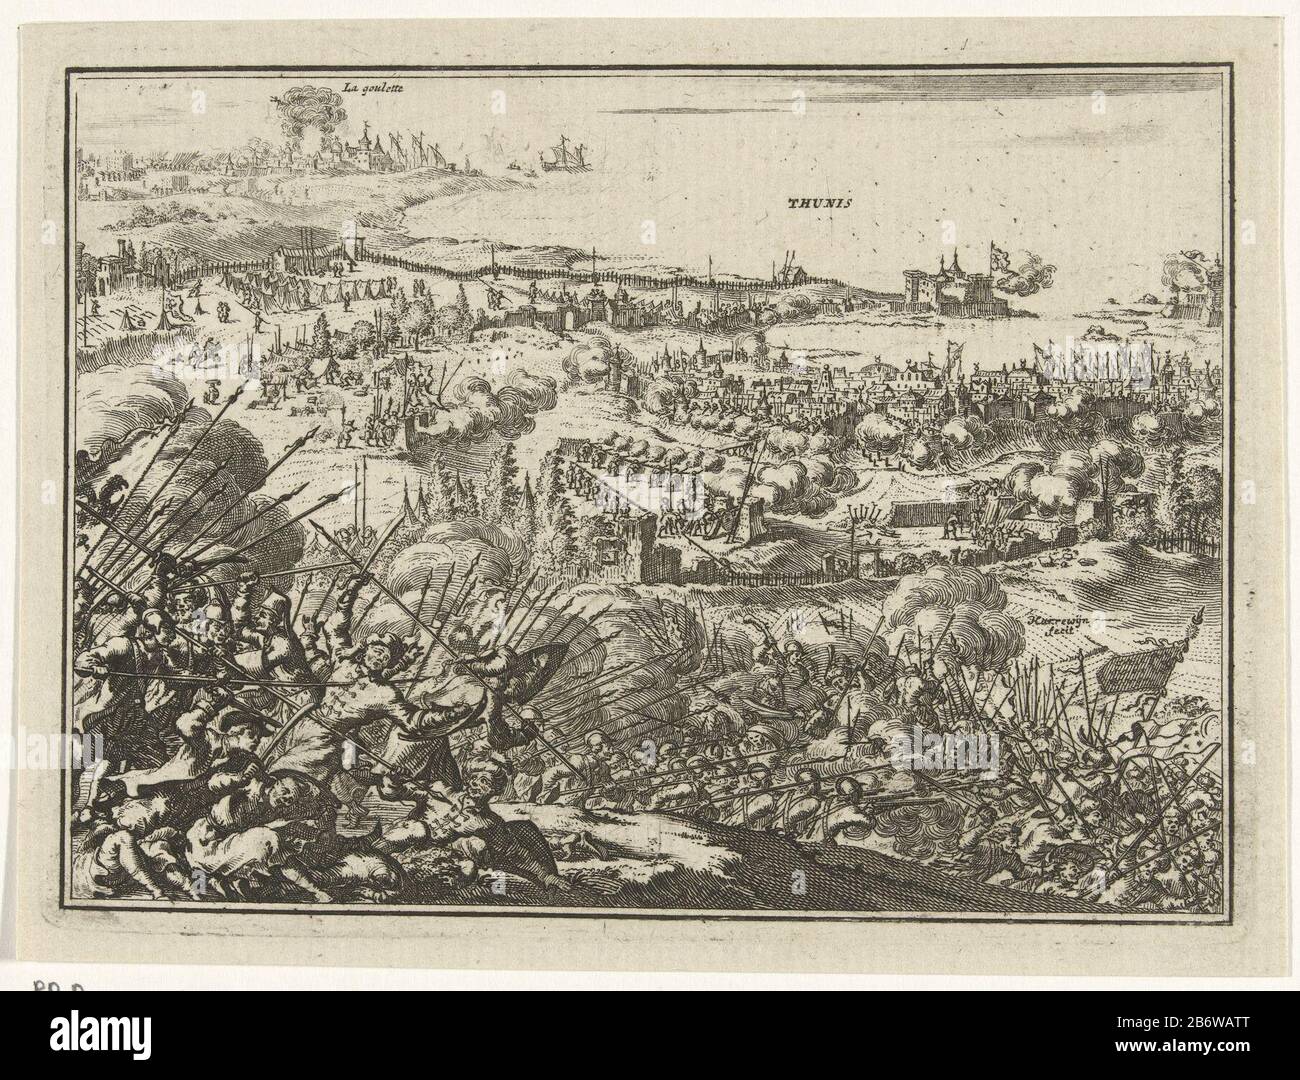 Inname van Tunis door Karel V Conquest of Tunis by Charles V, after a siege of the fortress La Goletta on July 14 1535. Manufacturer : print maker: Jacobus Harrewijn (indicated on object) Place manufacture: The Netherlands Date: 1682 - 1730 Physical characteristics: etching material: paper Technique: etching dimensions: plate edge: h 115 mm × W 160 mm Subject: battle (+ during the battle ) Taking of Tunis (1535) When: 1535-07-14 - 1535-07-14 Stock Photo